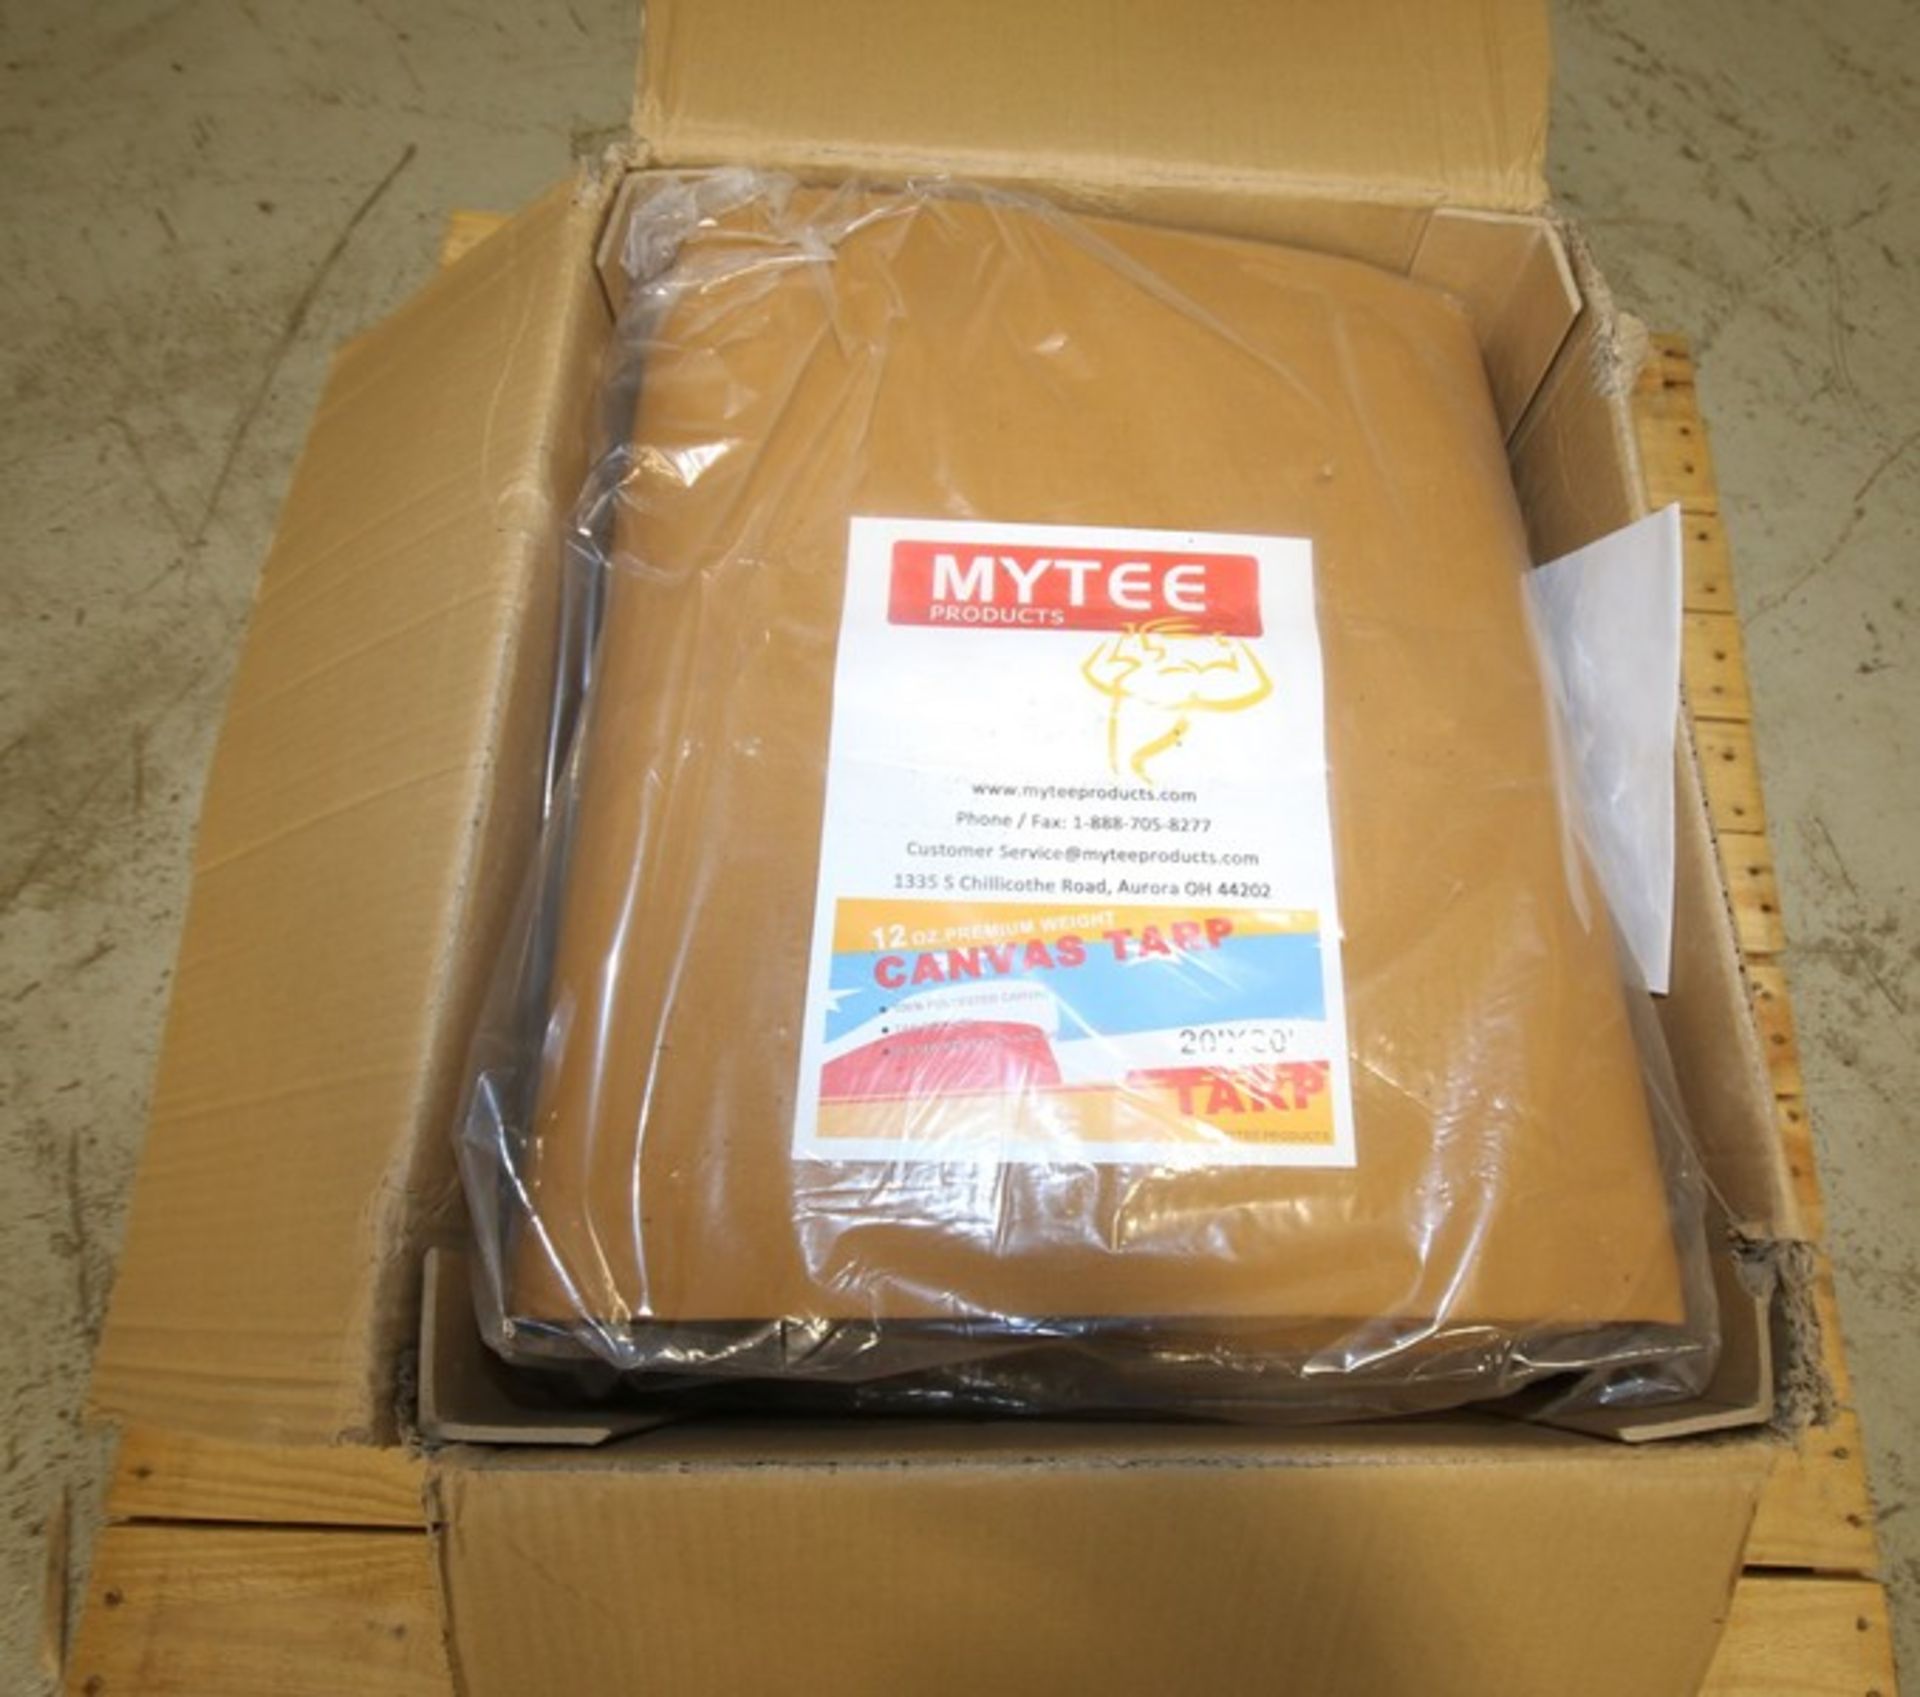 Mytee 20 x 20 New Canvas Tarp, 12 oz Weight, Order #VC484D (INV#66959) (Located @ the MDG Auction - Bild 2 aus 4